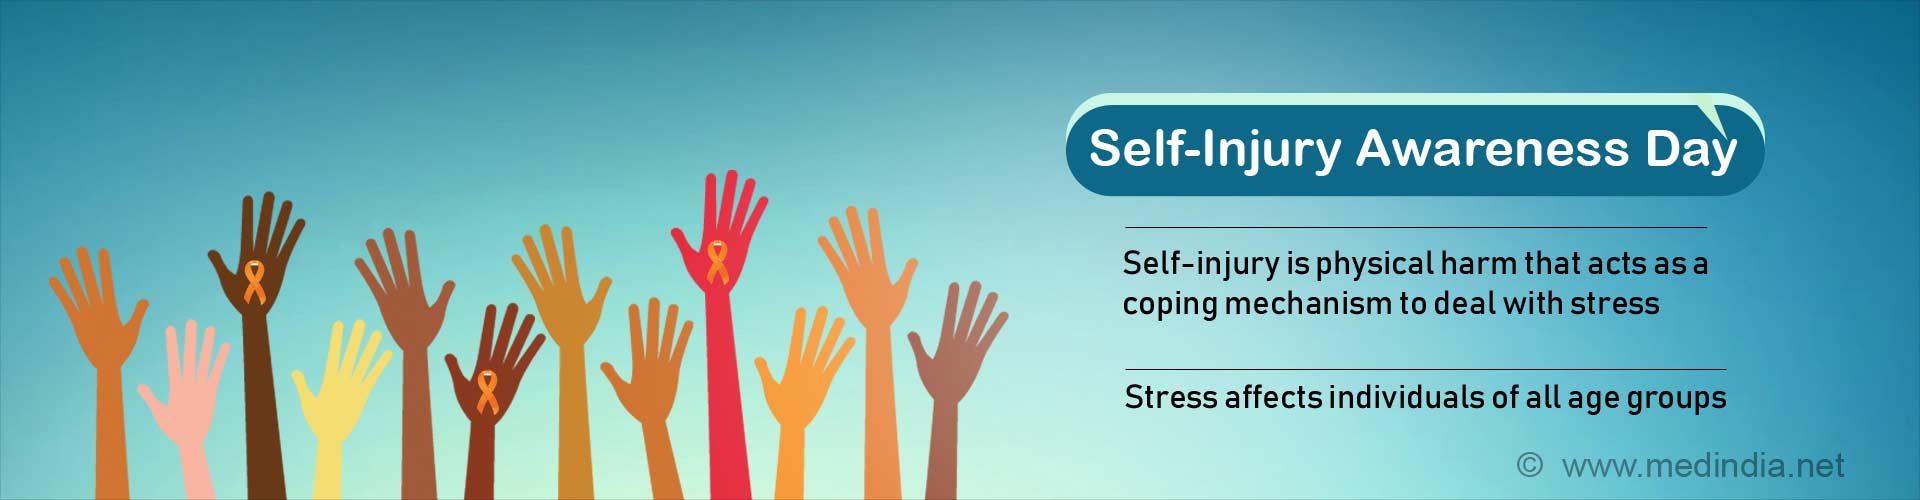 self-injury awareness day
- self-injury is physical harm that acts as a coping mechanism to deal with stress
- stress affects individuals of all age groups